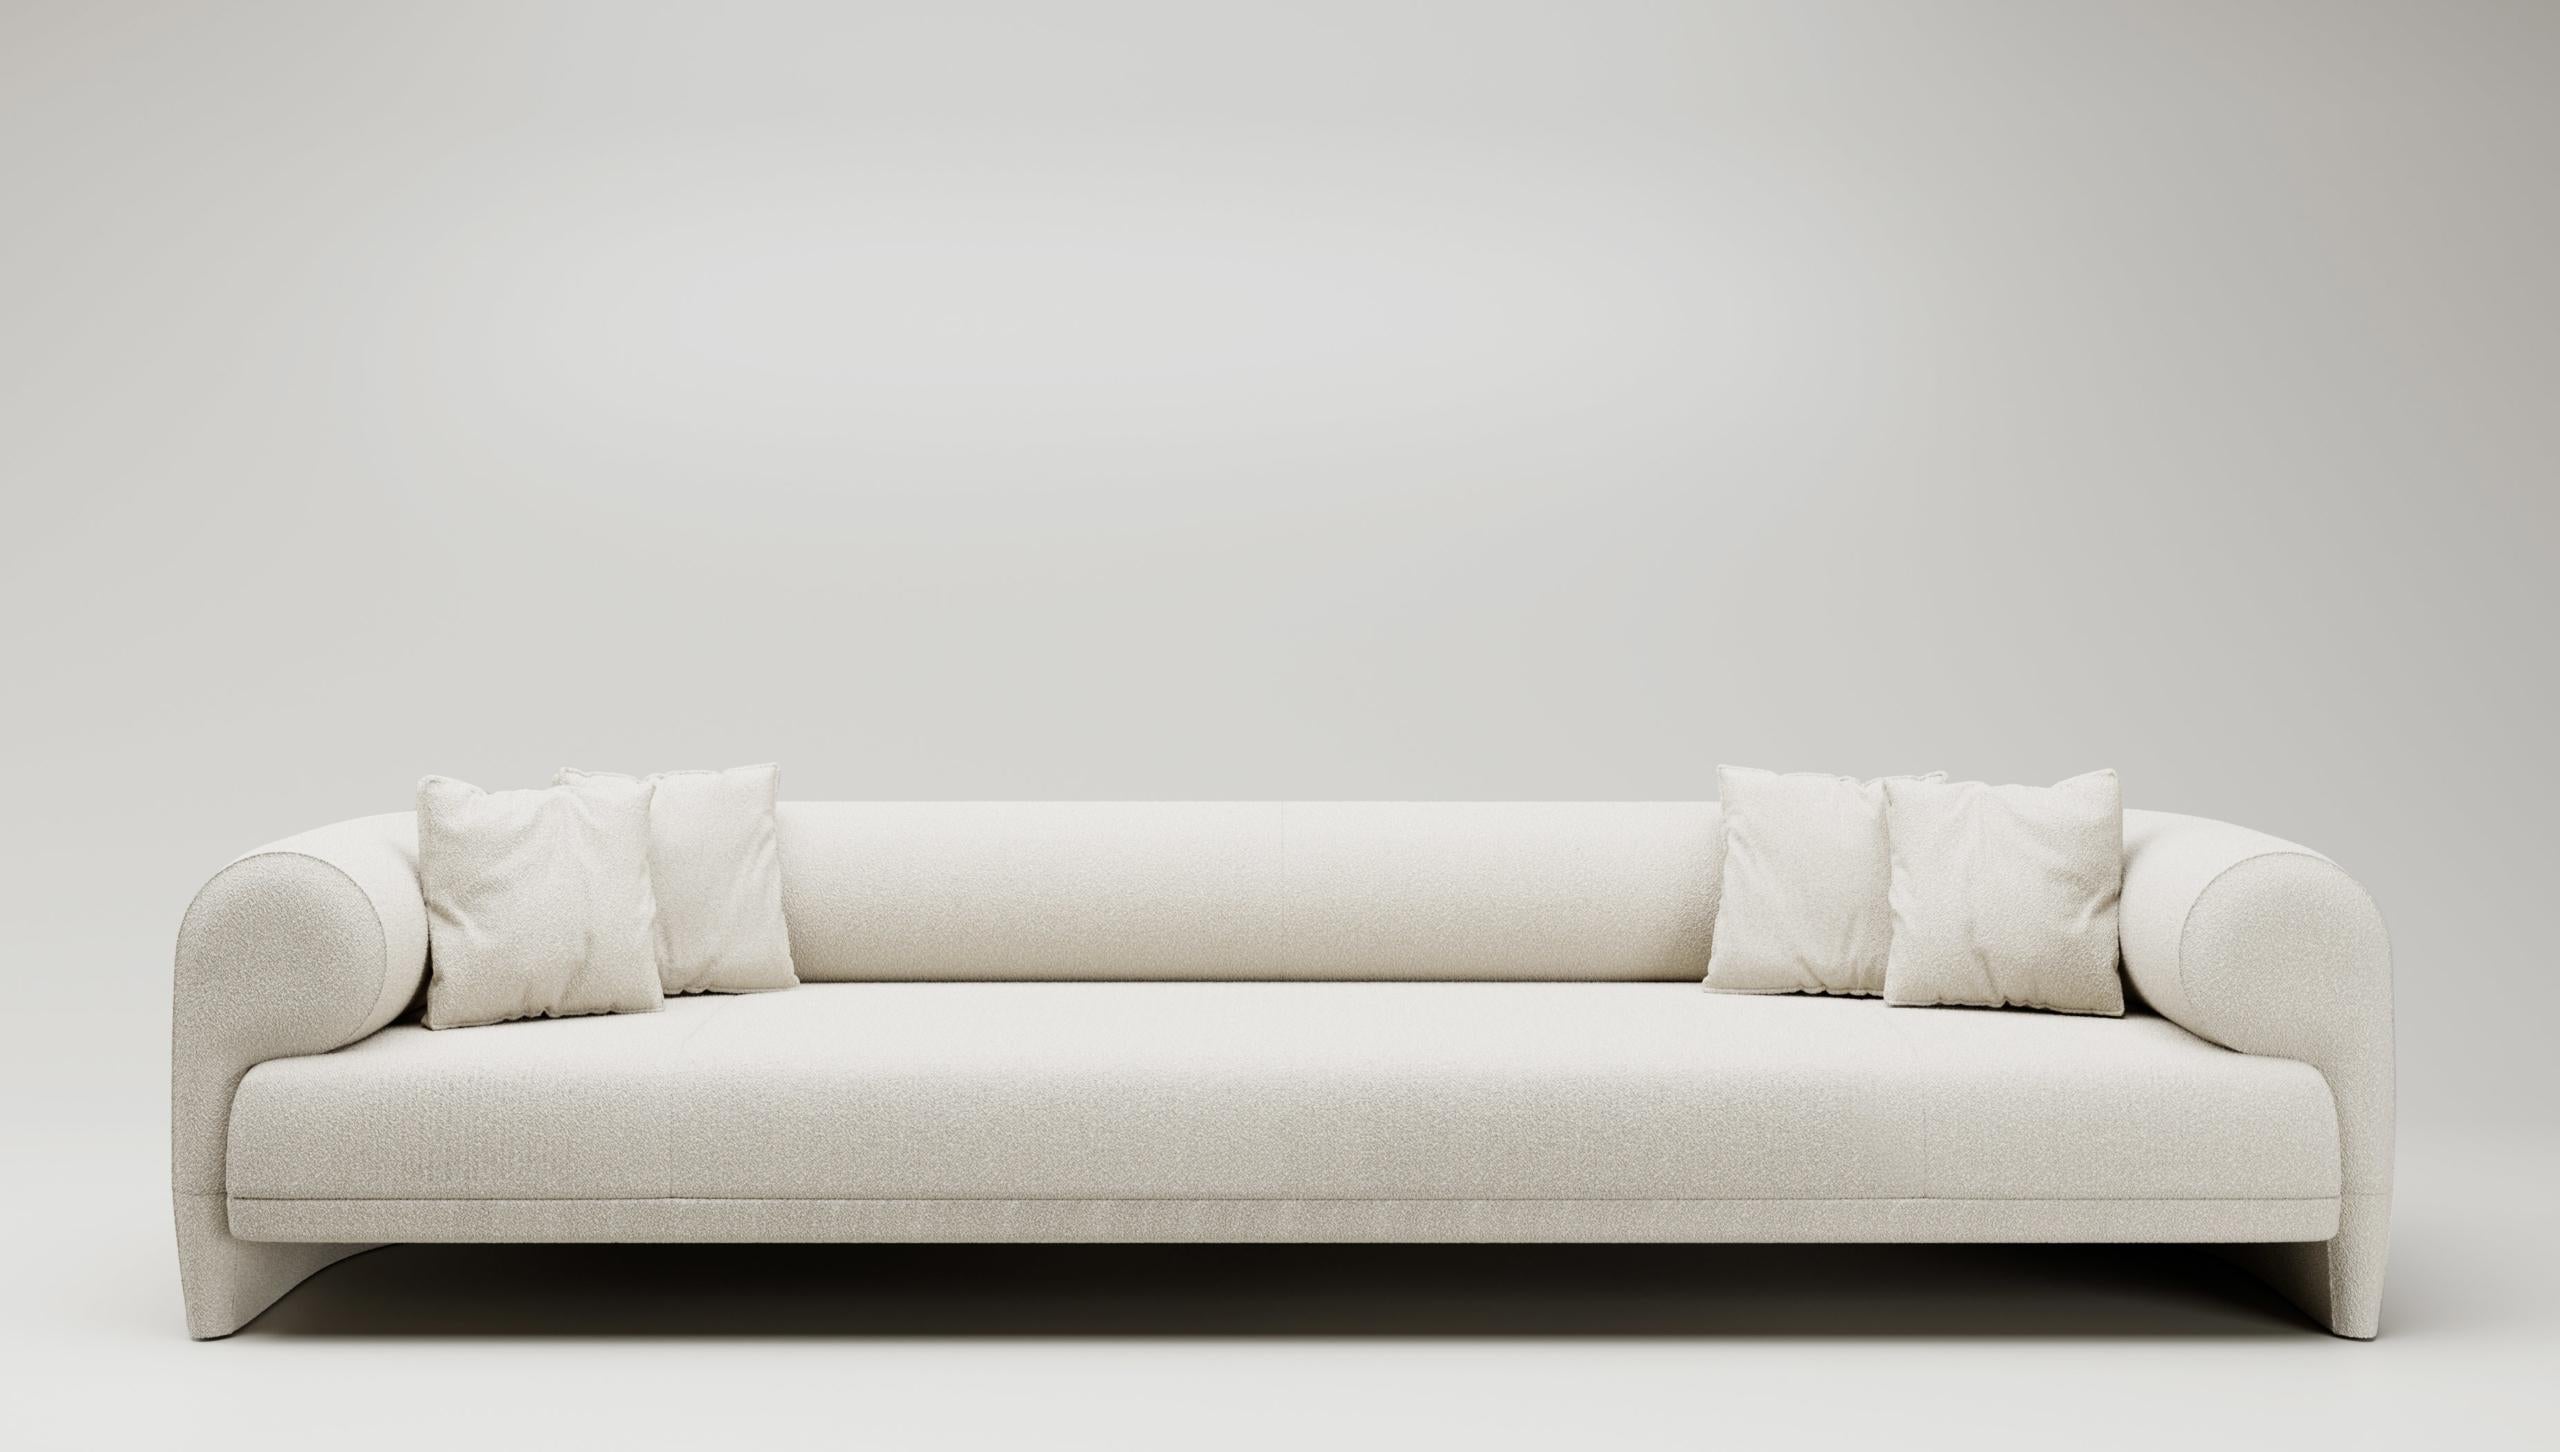 Kasba Sofa by Andrea Bonini
Limited Edition
Dimensions: D 100 x W 285 x H 72 cm.
Materials: Loro Piana fabric.

Made in Italy. Limited series, numbered and signed pieces. Custom size or finish on request.  Please contact us.

The aim of the Edition